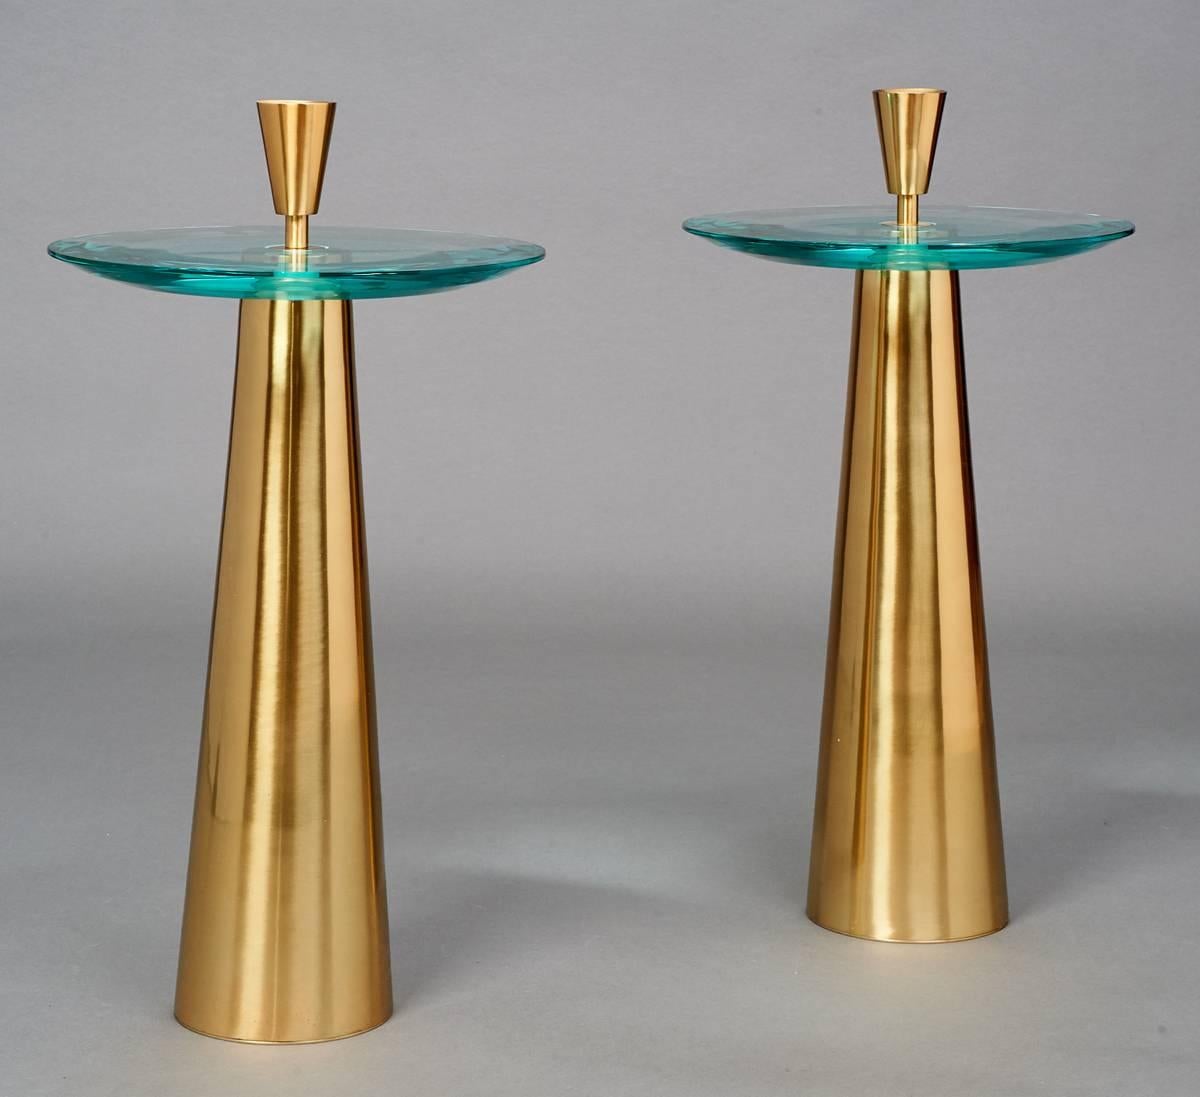 Roberto Rida (b. 1943)
A sculptural side table 
Triple beveled glass, polished tapered brass base and finial
Signed, Italy 2017
Limited edition, exclusive to L' Art de Vivre
Dimensions: 13.5 Ø x 22.5 H at glass. 
Shown as a pair, priced and sold